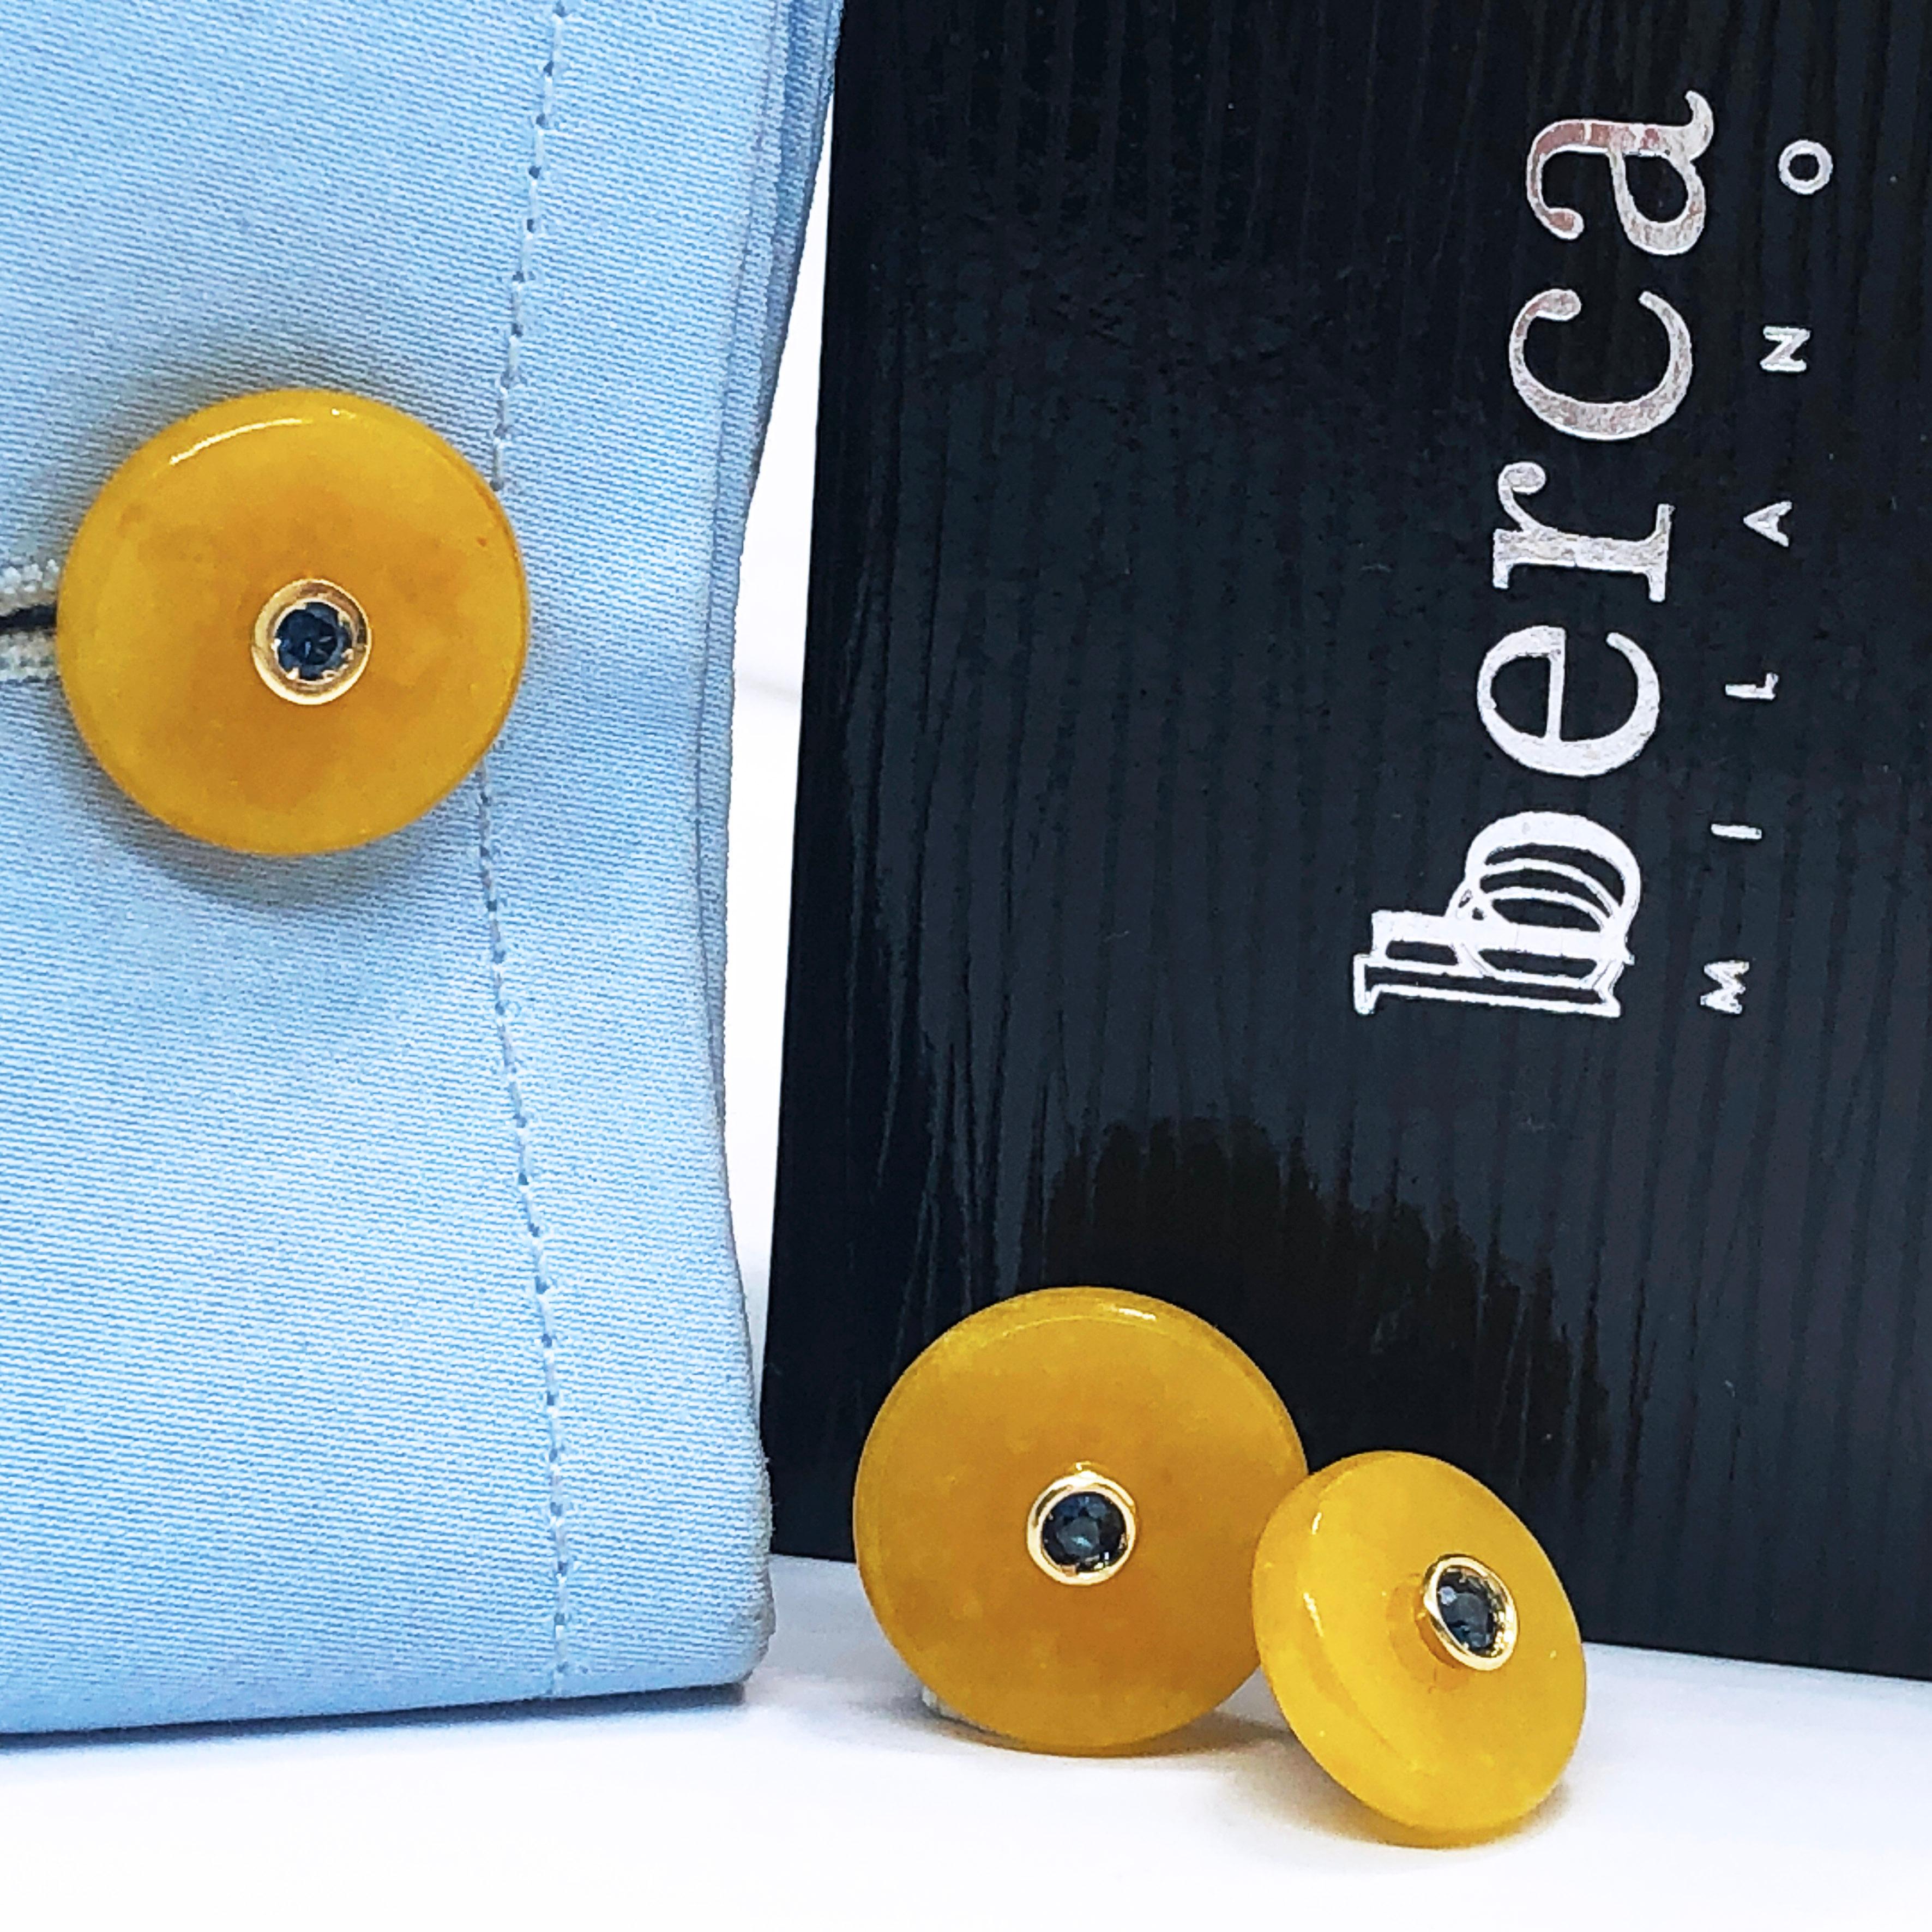 Berca Blue Sapphire in a 19.50 Kt Yellow Jade Disk 18K Gold Setting Cufflinks For Sale 7